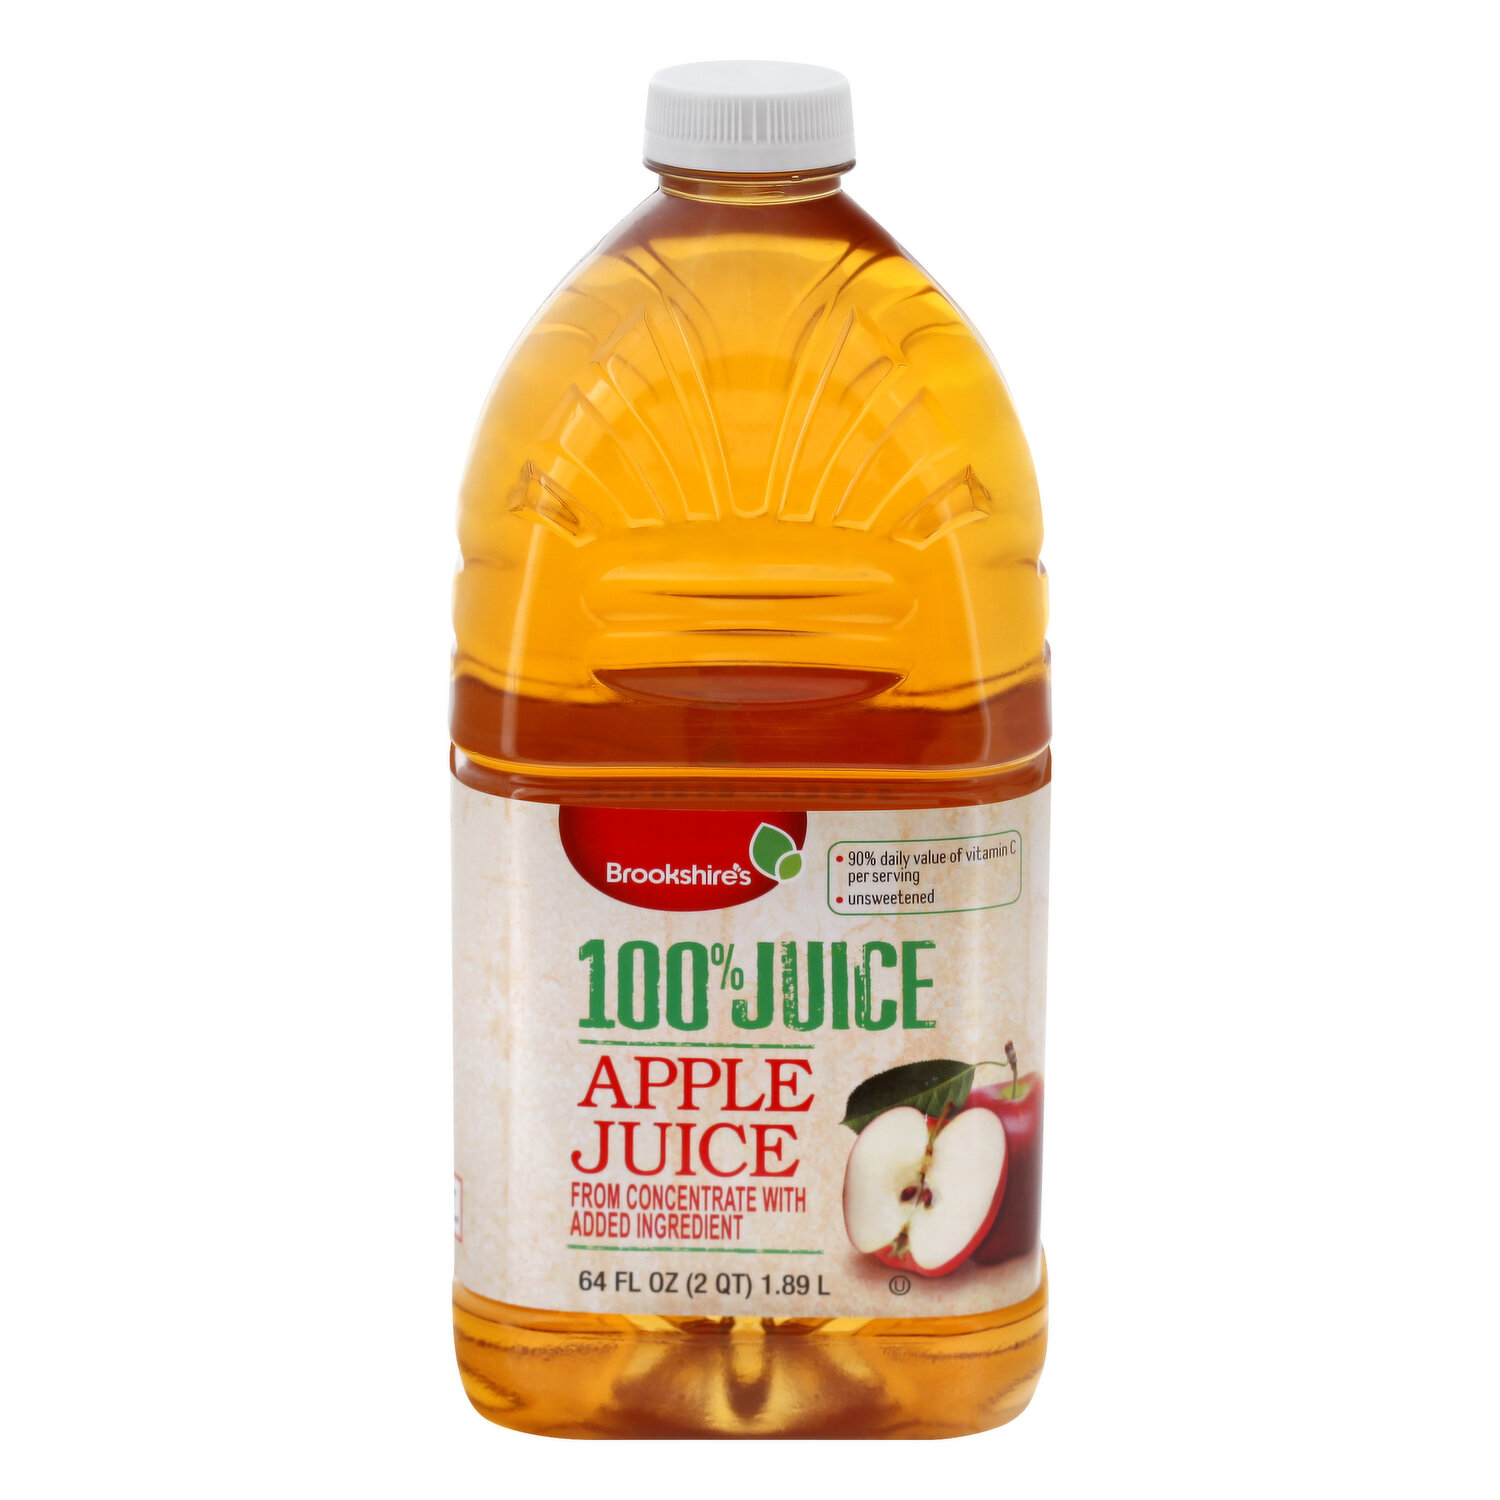  good2grow 100% Apple Juice 24-pack of 6-Ounce BPA-Free Juice  Bottles, Non-GMO with No Added Sugar and an Excellent Daily Source of  Vitamin C. SPILL PROOF TOPS NOT INCLUDED (Pack of